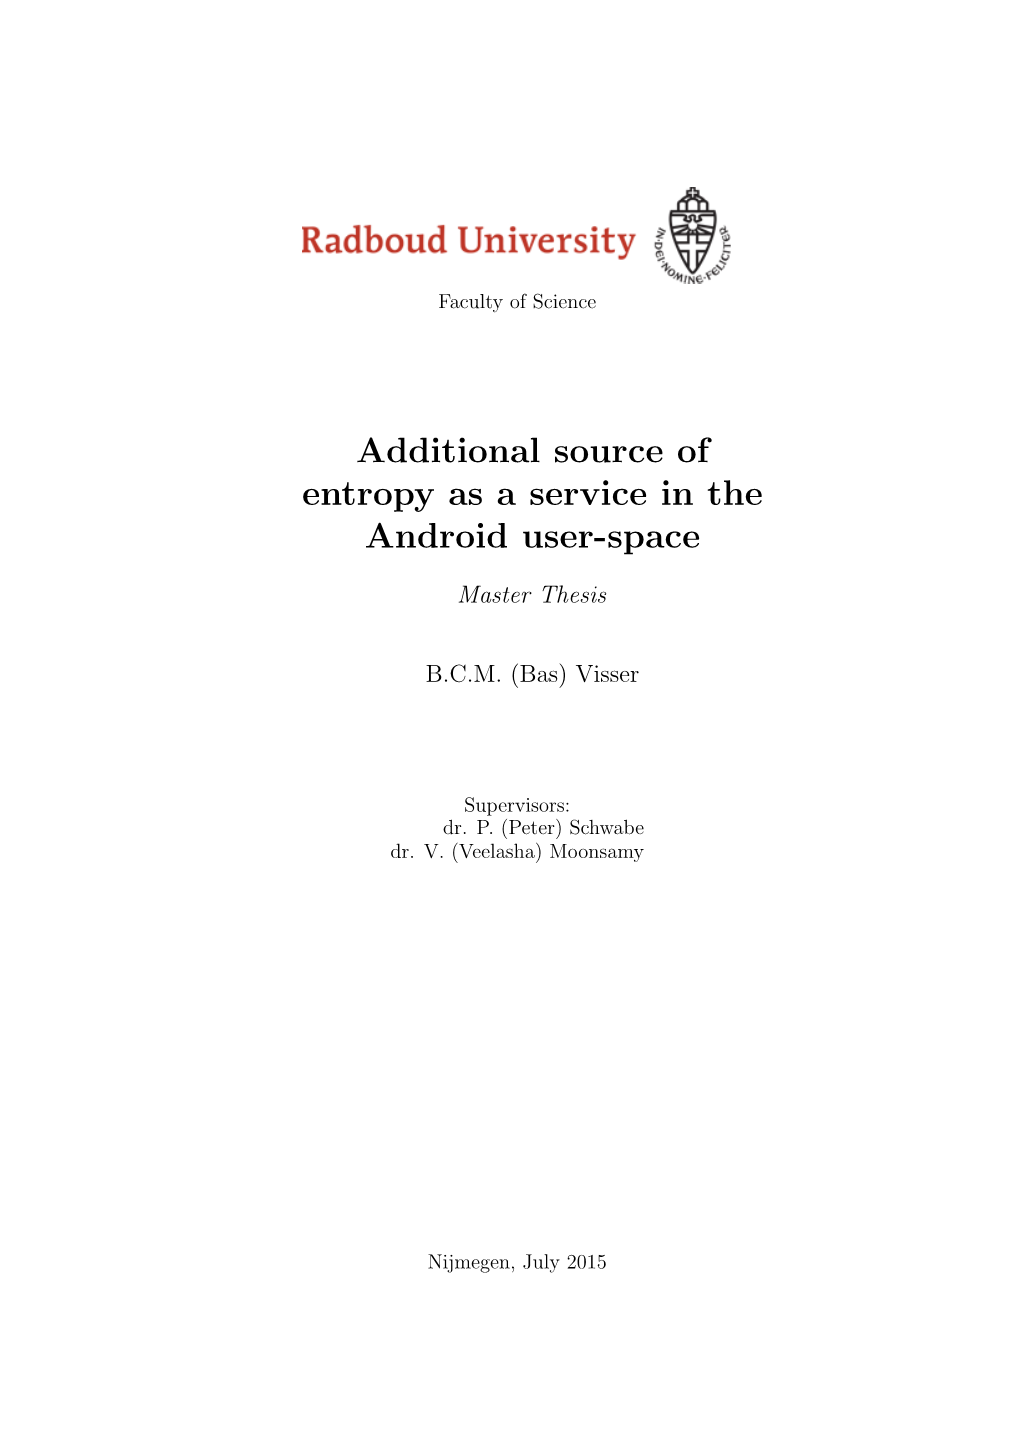 Additional Source of Entropy As a Service in the Android User-Space